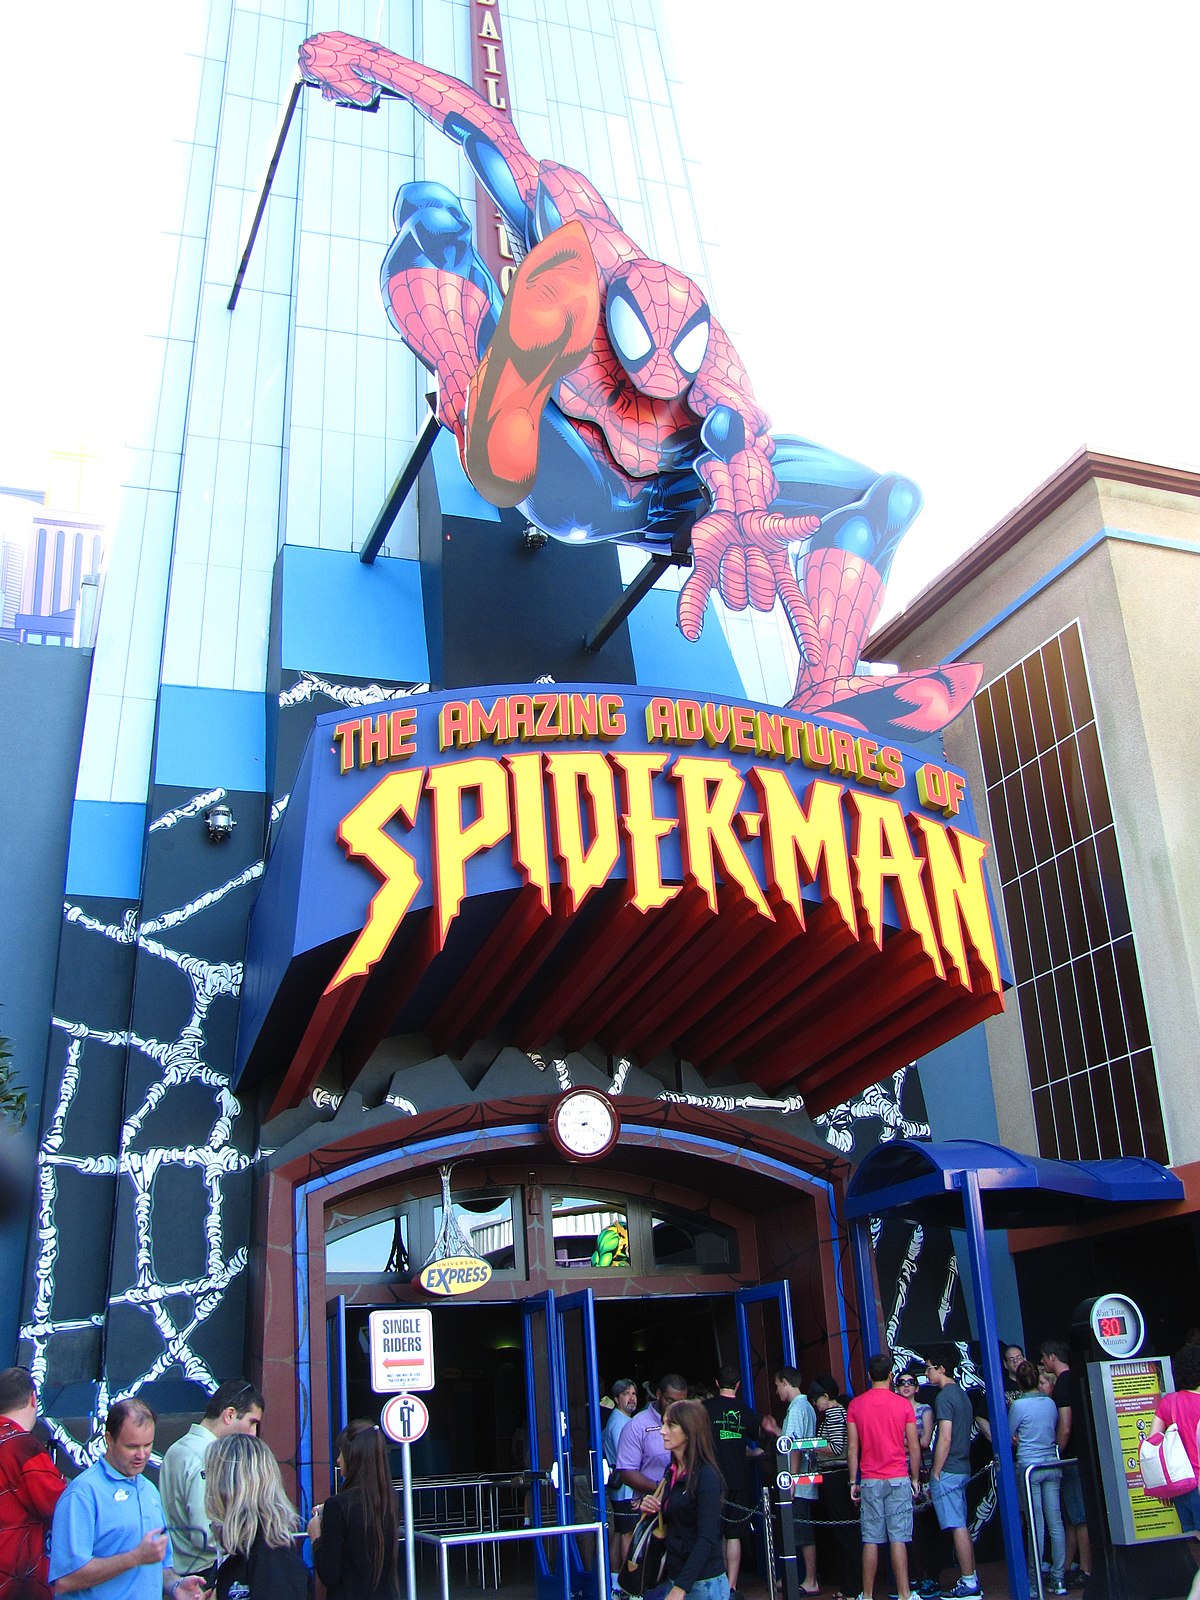 The Amazing Adventures of Spider-Man - Wikipedia